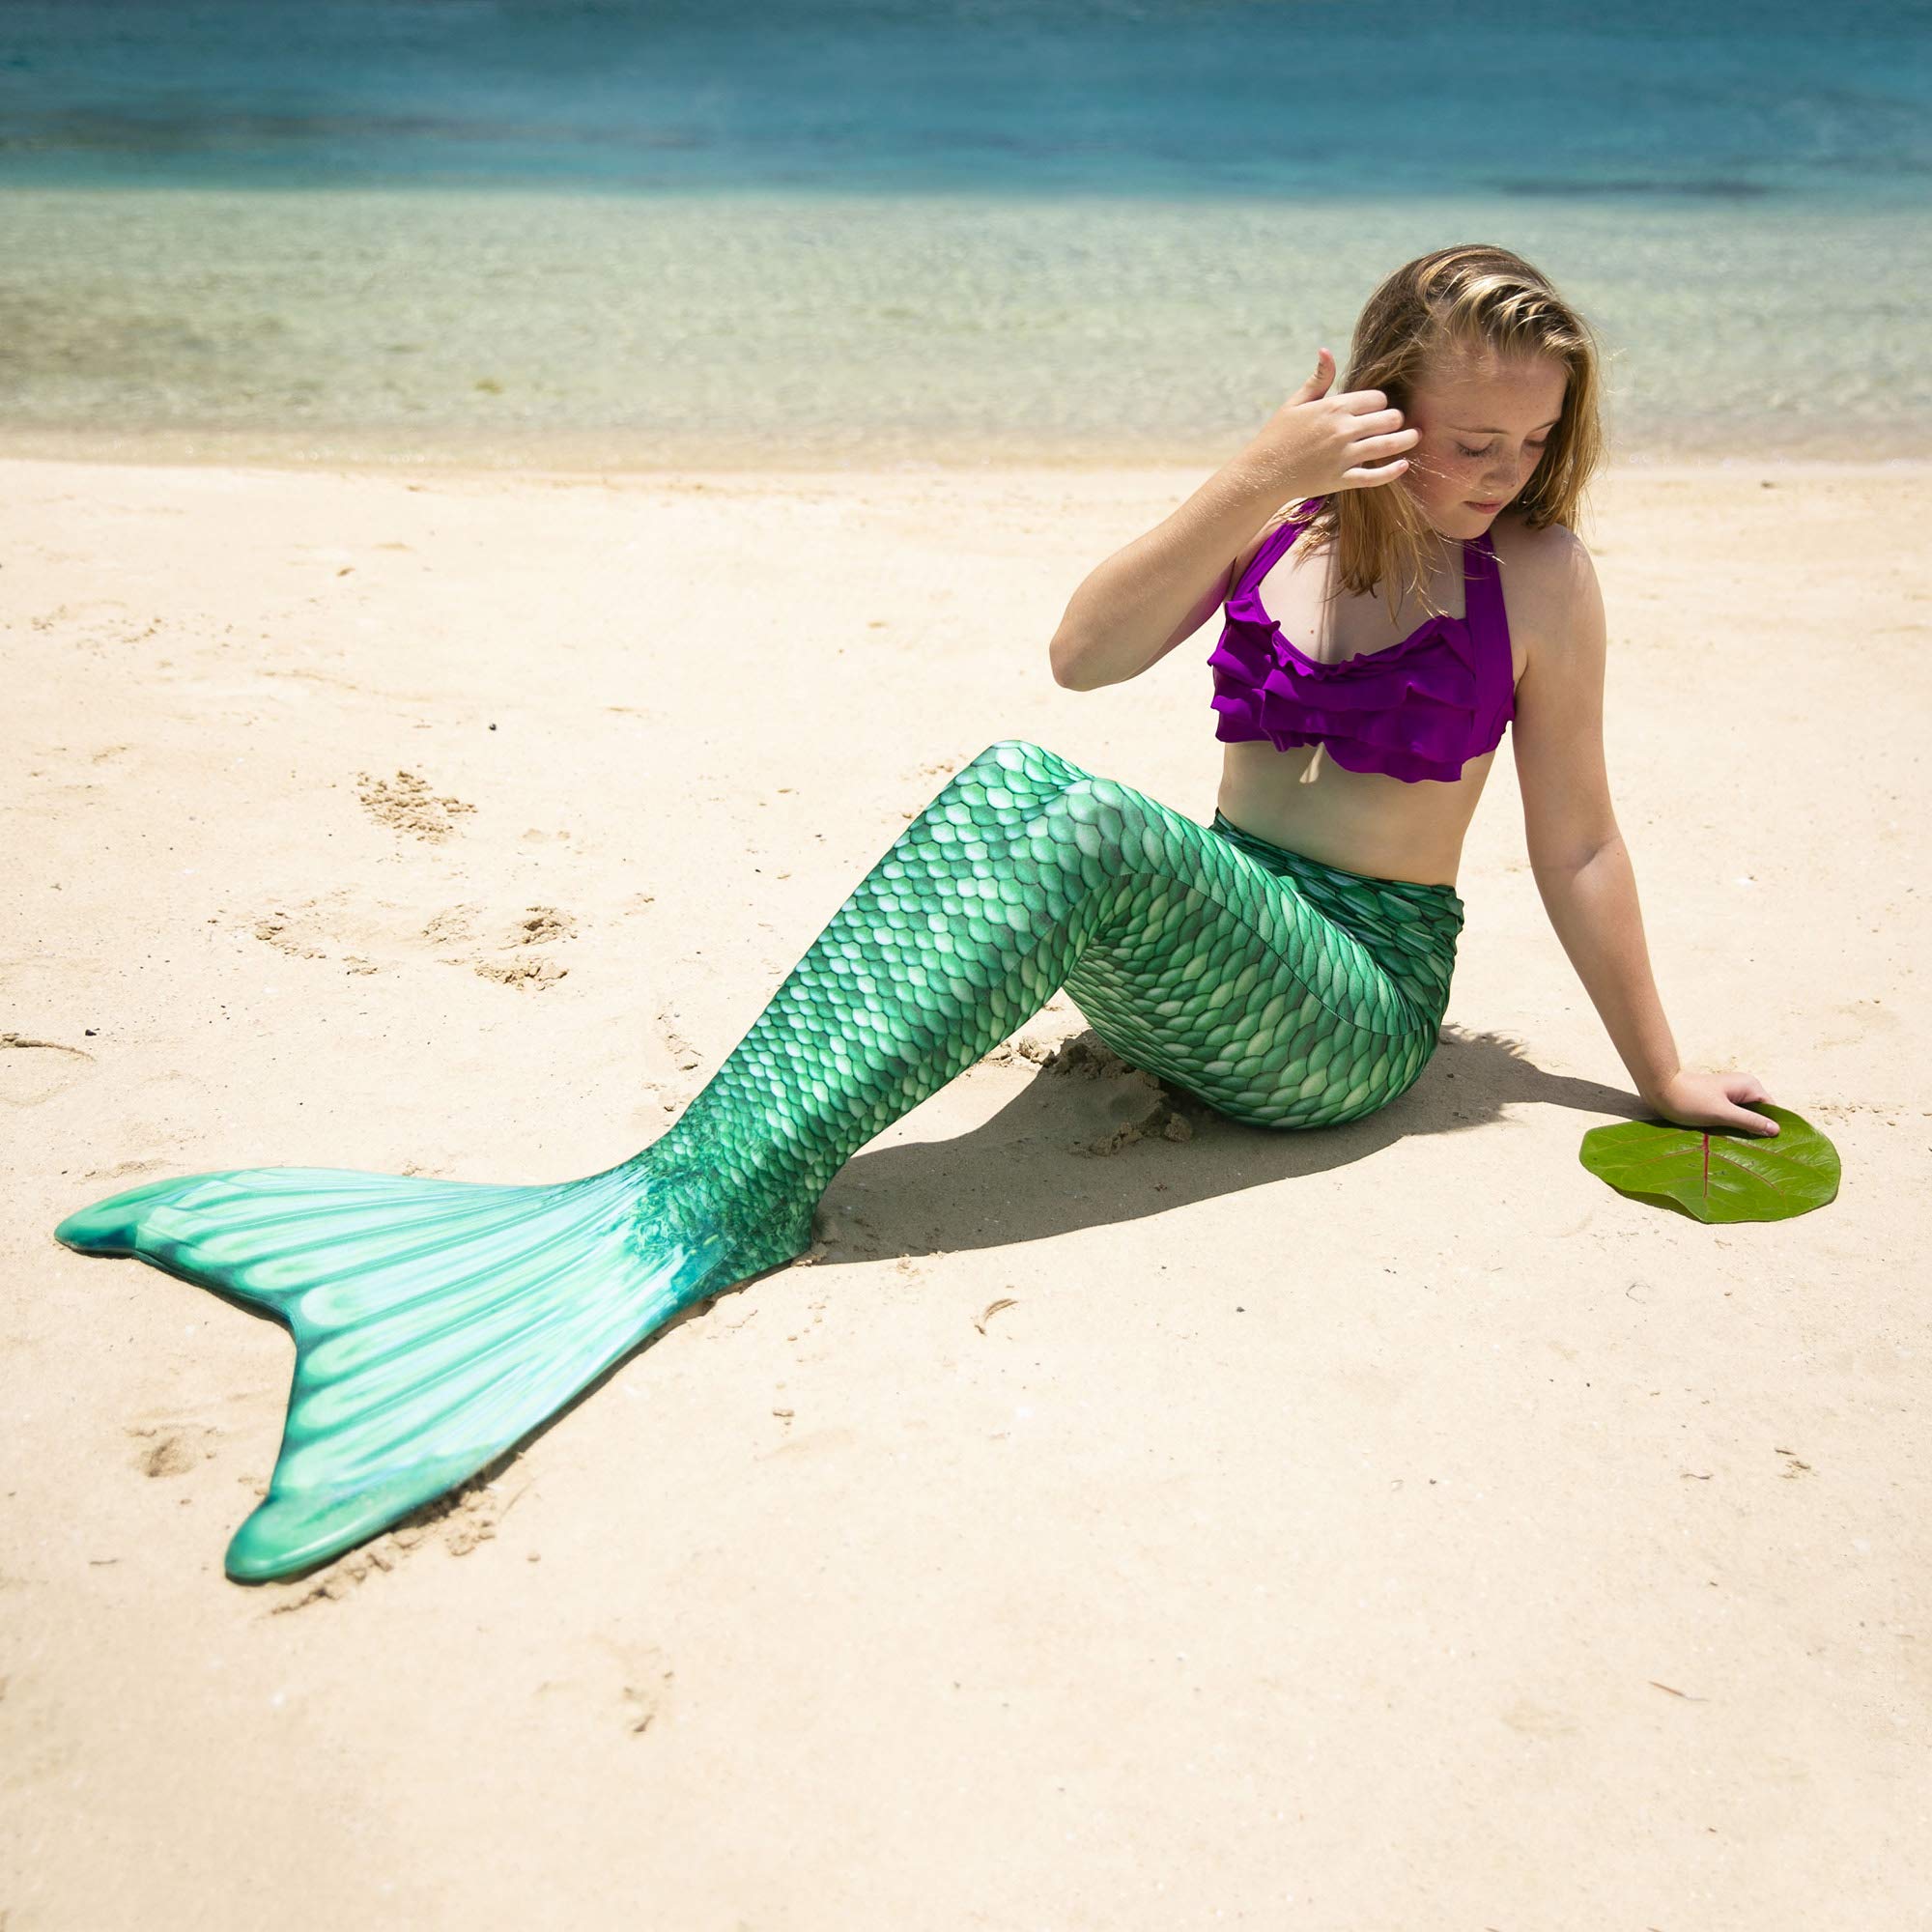 Fin Fun Mermaidens - Mermaid Tails for Swimming for Women, Teens and Adults with Monofin